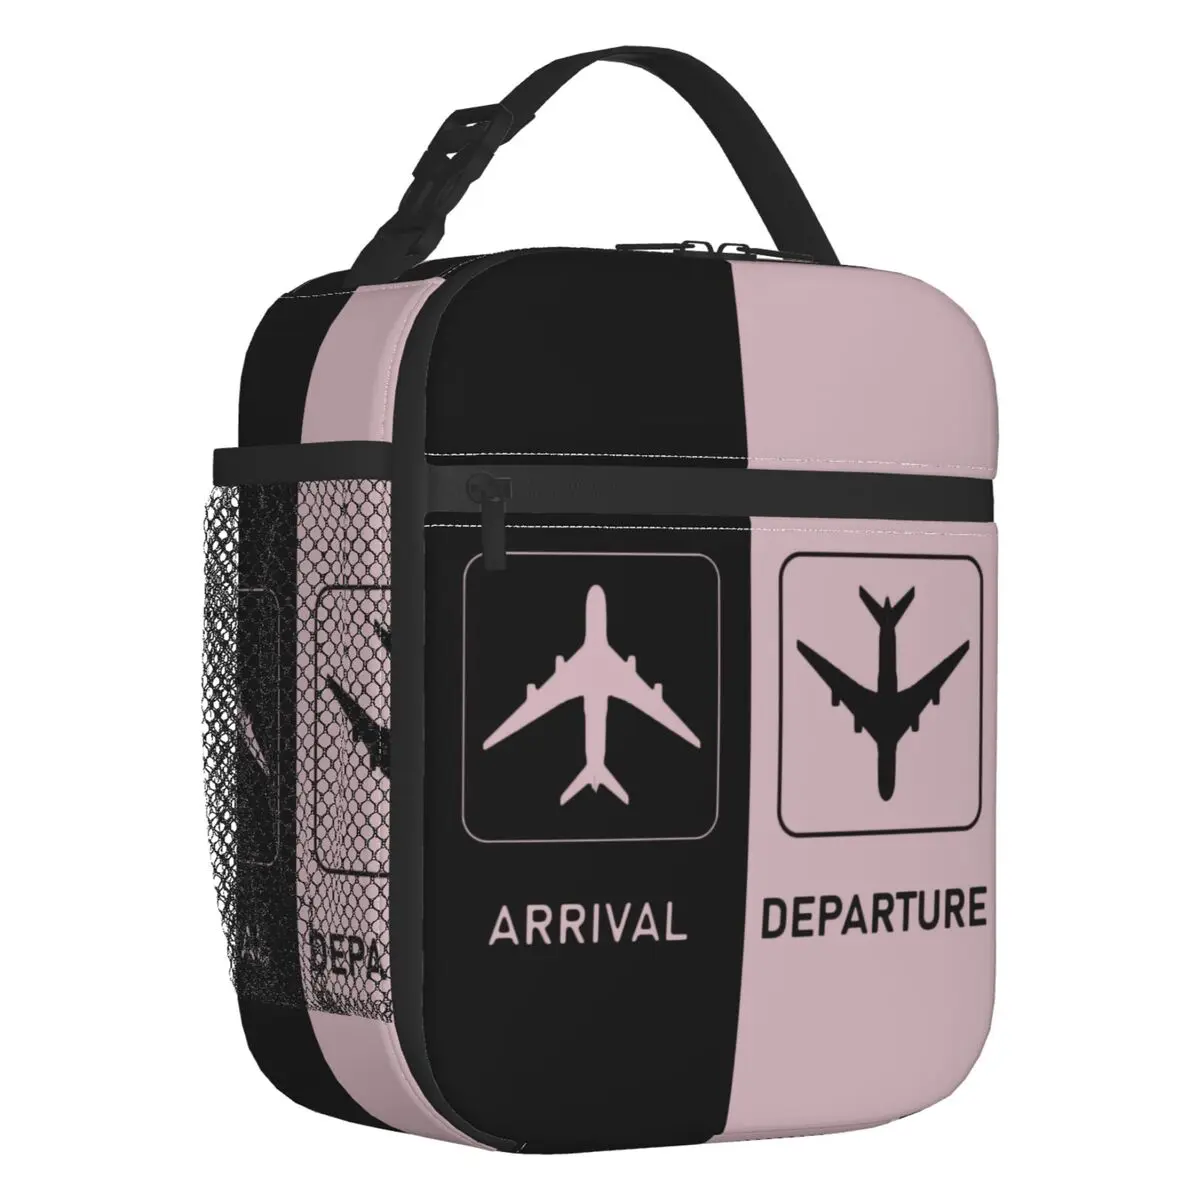 

Plane Arrivals And Departures Insulated Lunch Bag Outdoor Picnic Plane Aviator Airplane Resuable Cooler Thermal Lunch Box Kids